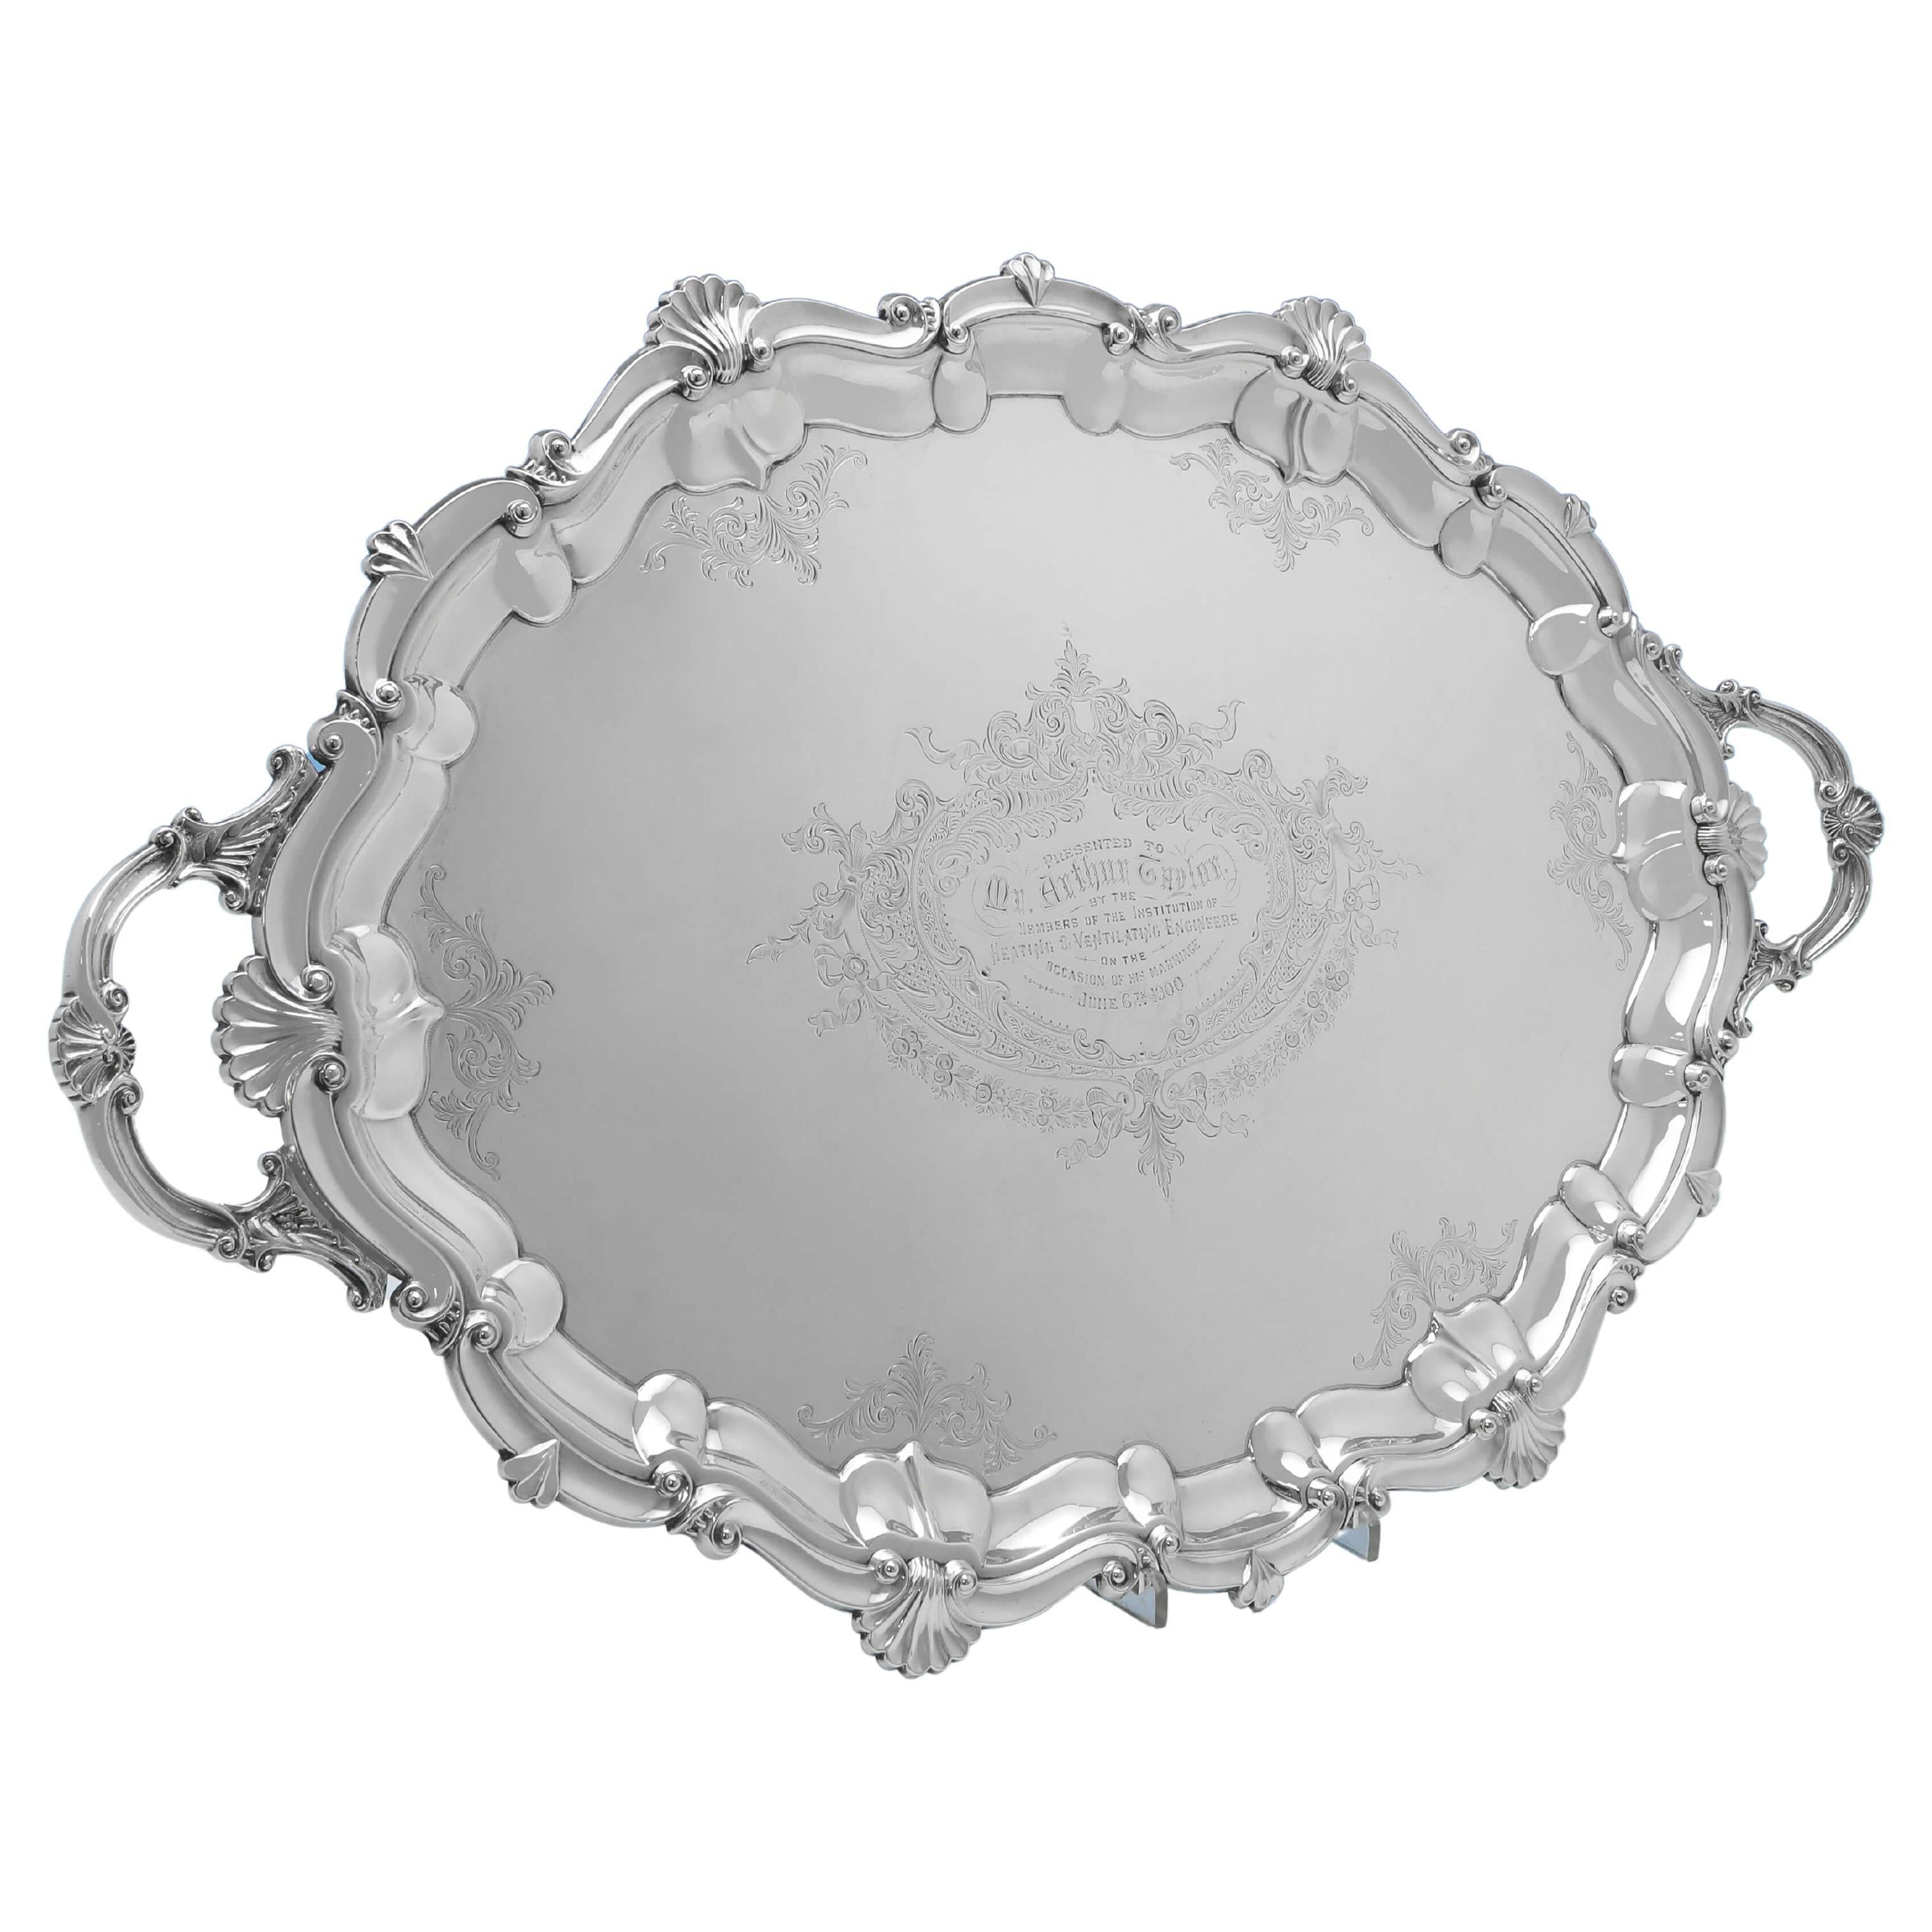 Victorian Antique Silver Plated Tray, Presentation Inscription for 1900